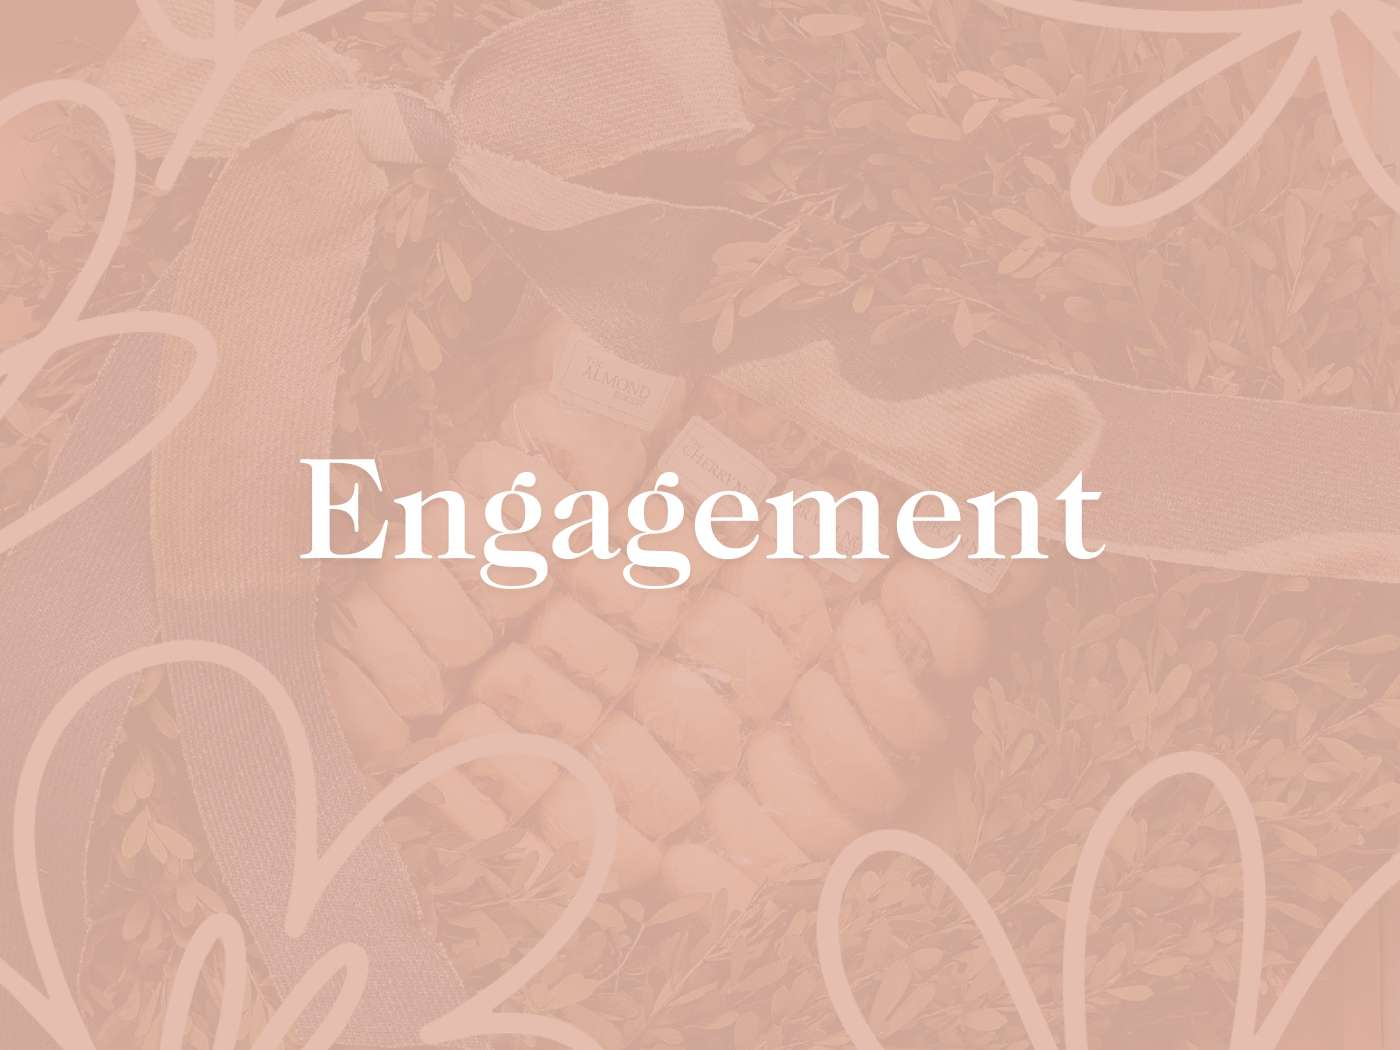 A captivating display of engagement-themed florals, representing the ideal, thoughtful, and sentimental gift from the Engagement Collection at Fabulous Flowers and Gifts, soon to be shared and cherished.